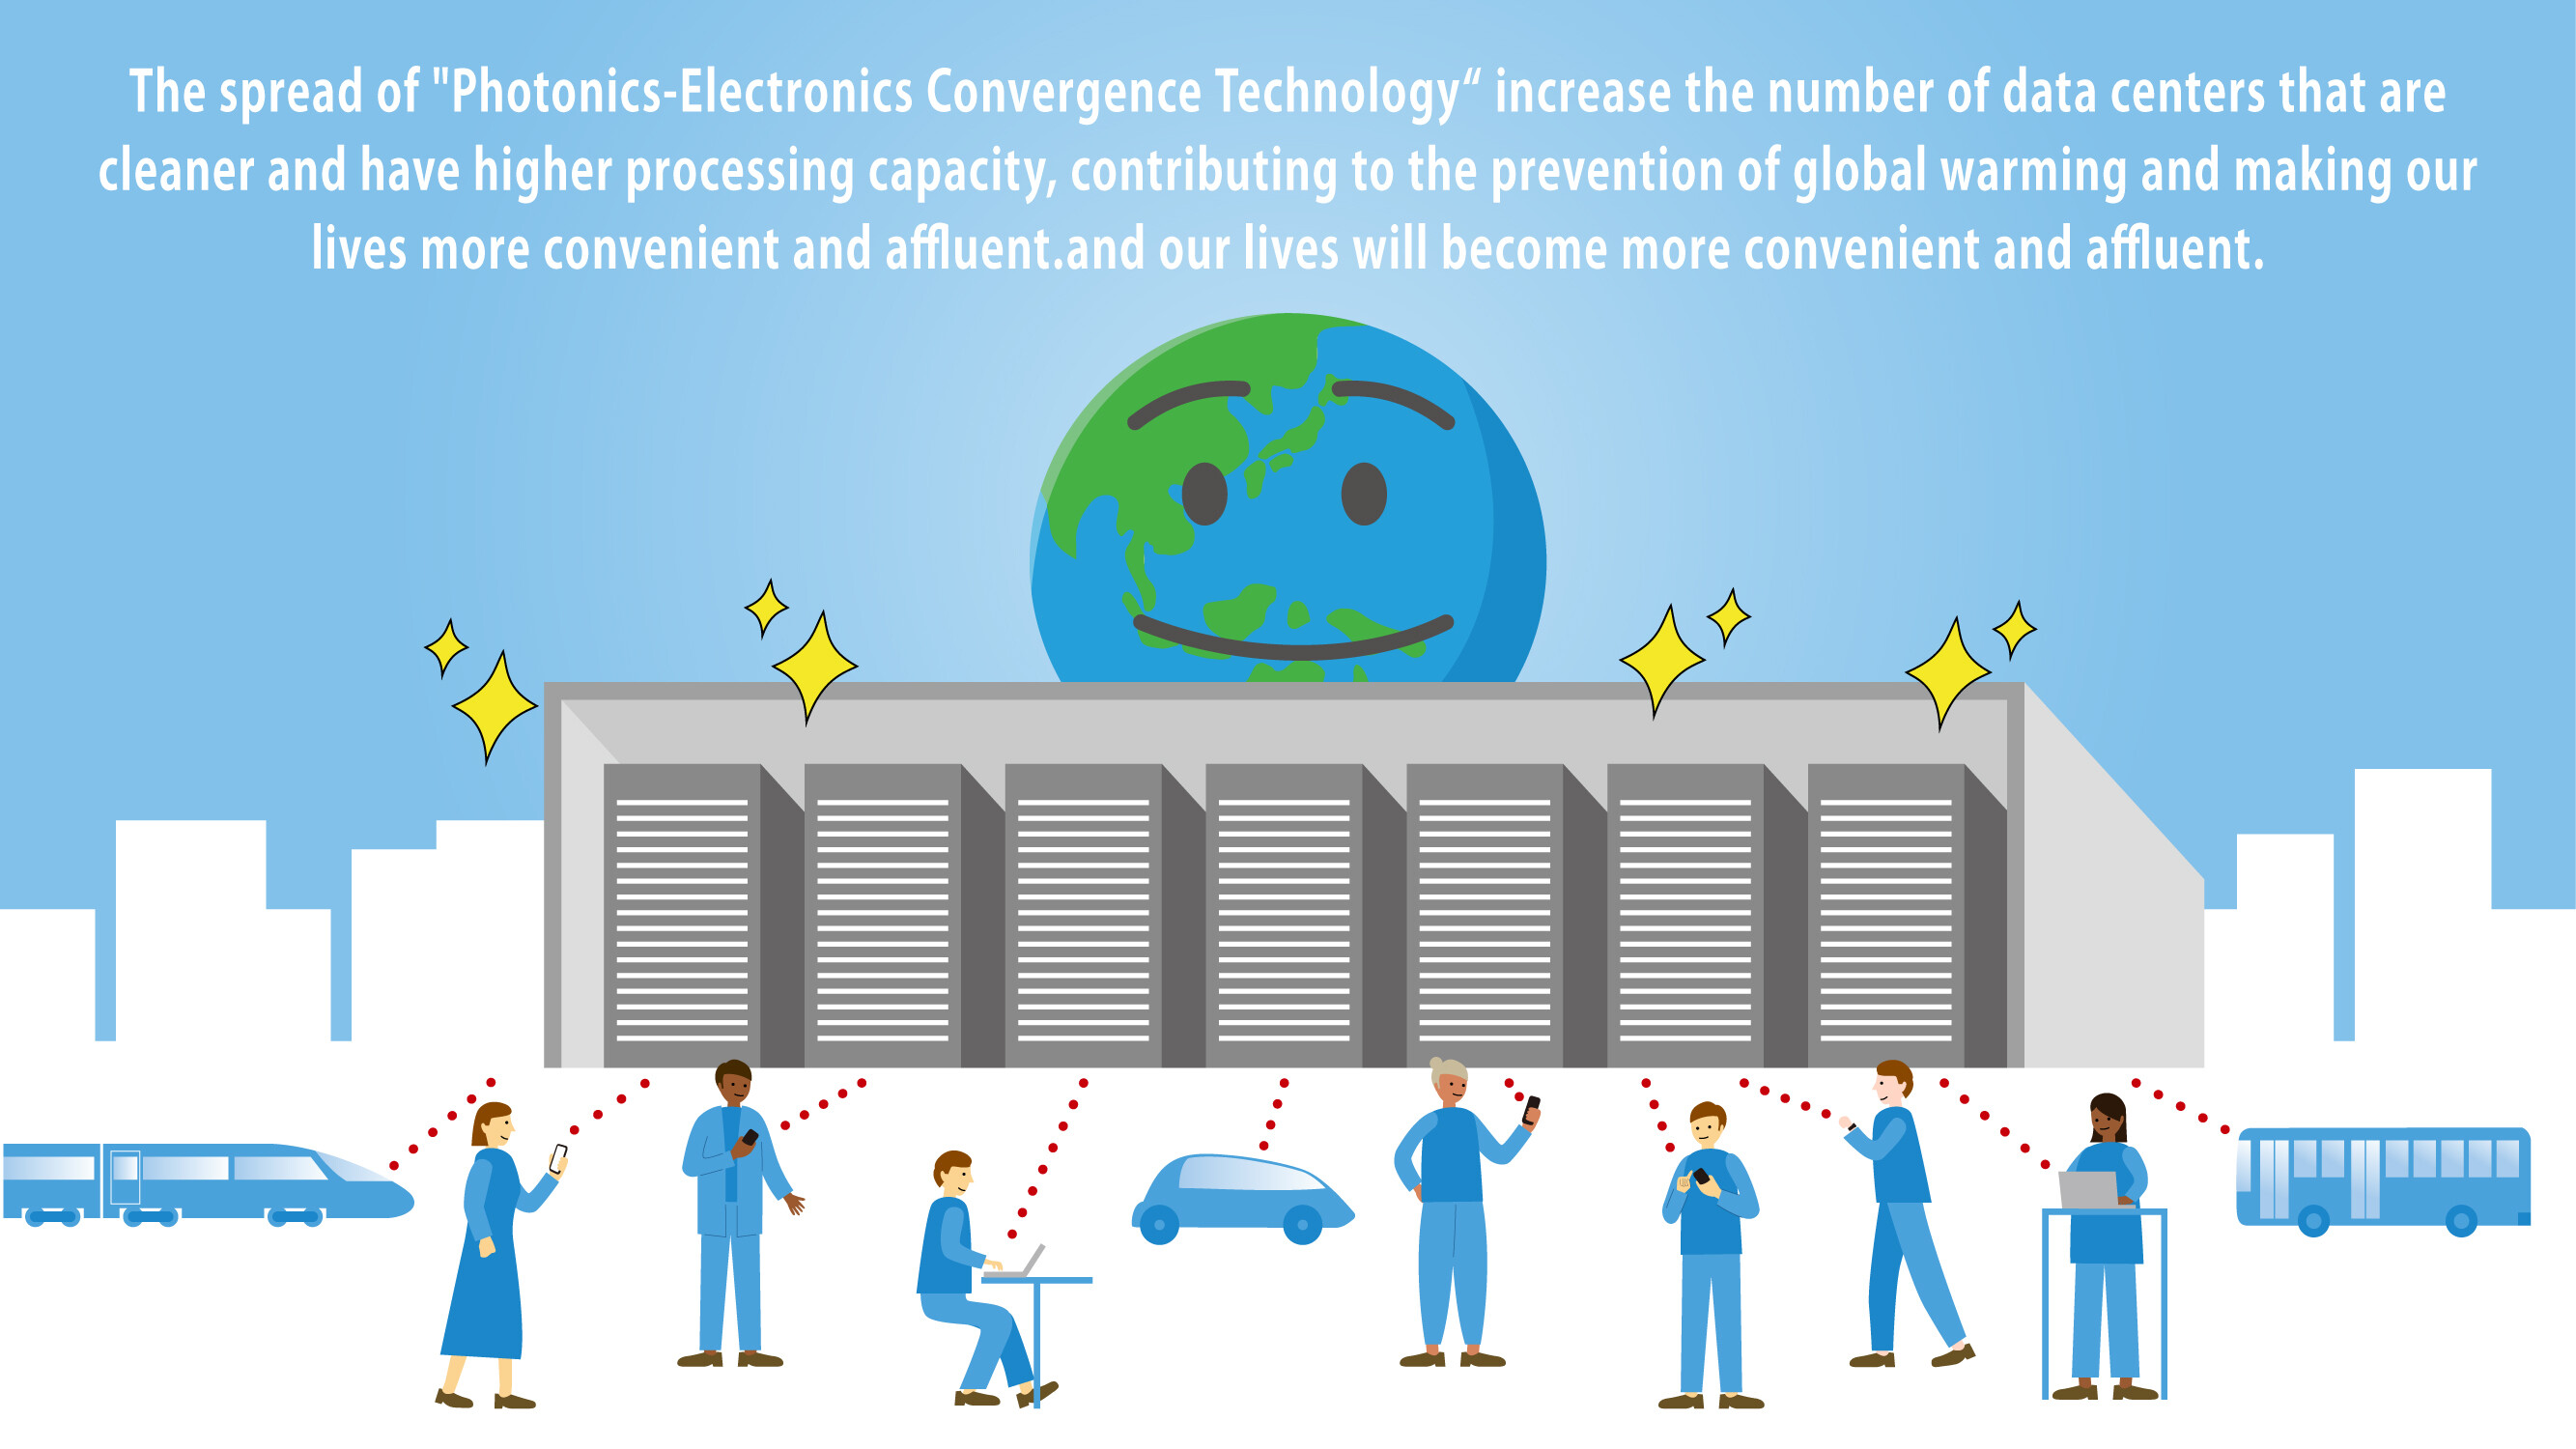 Images: (5) The widespread use of Photonics-Electronics Convergence Technology will lead to a cleaner and more convenient future.